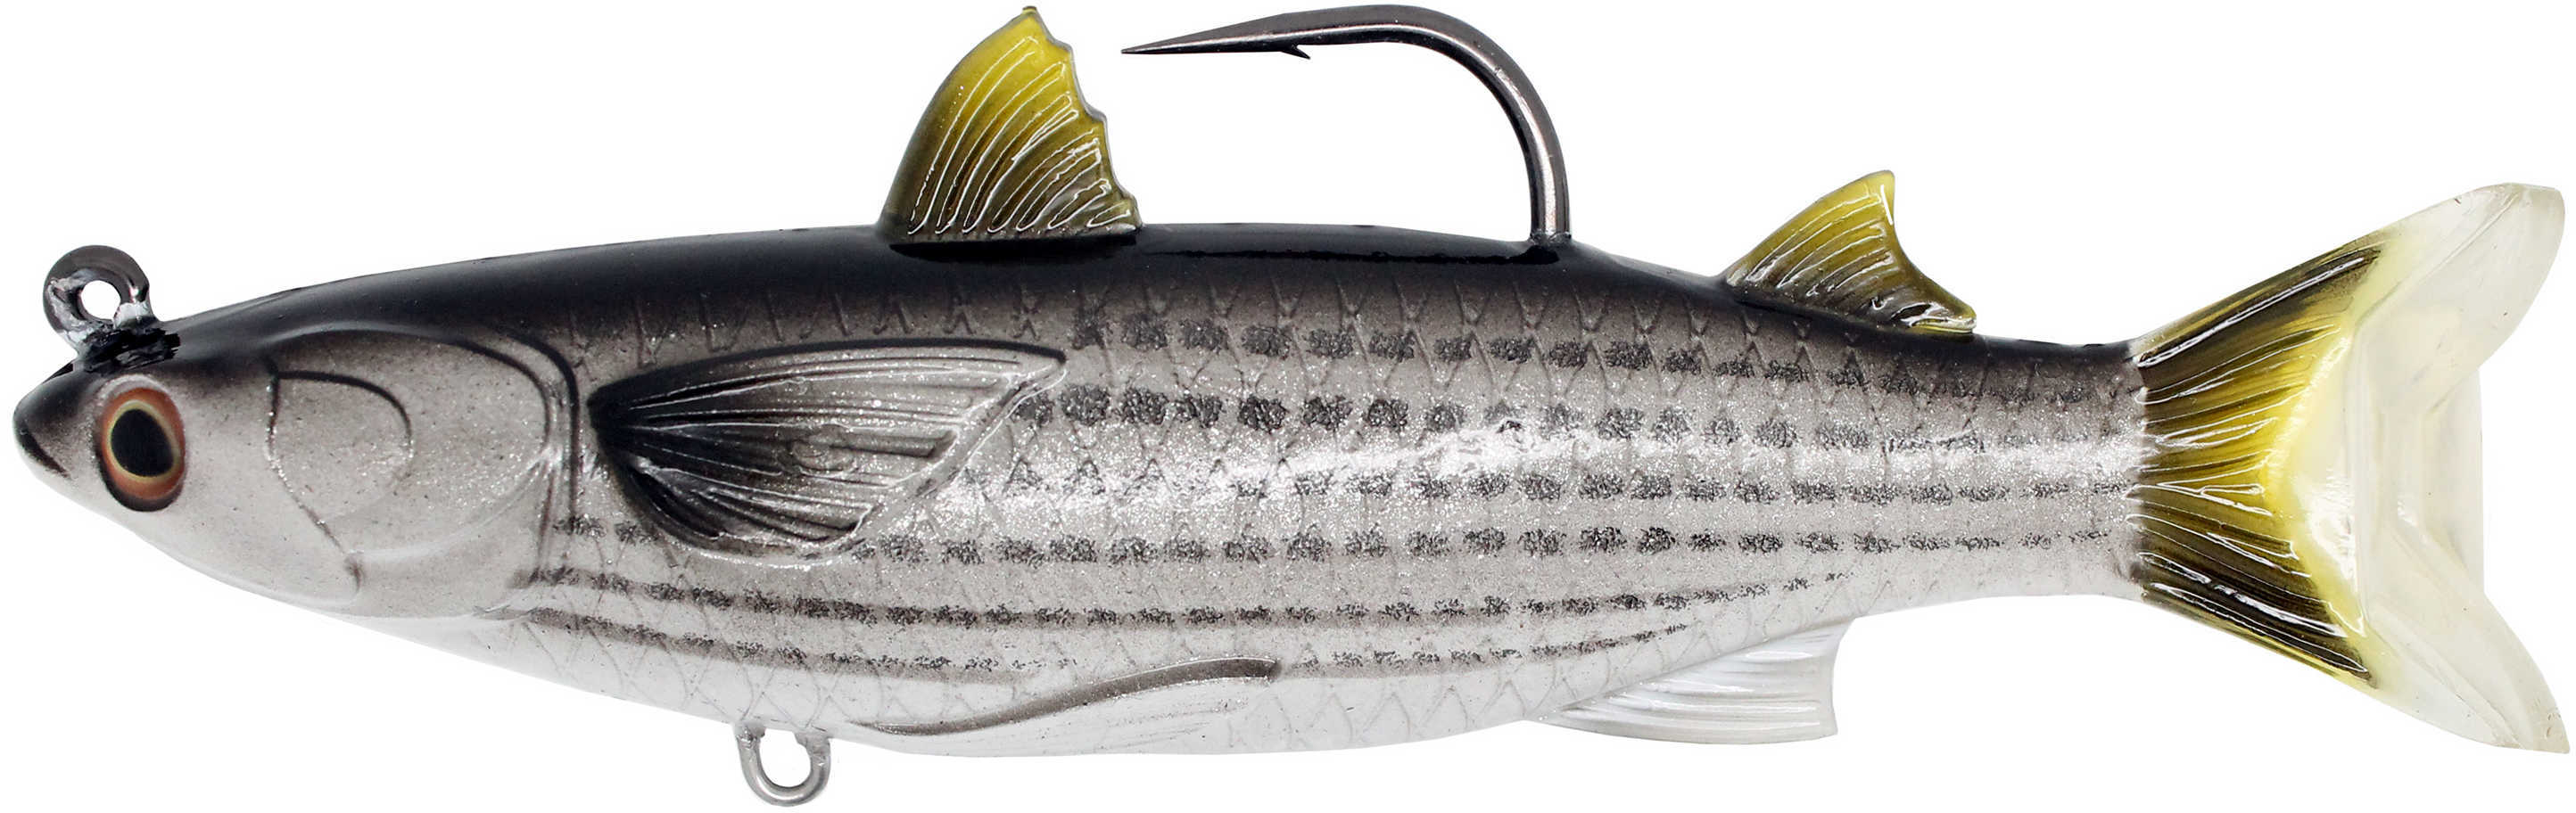 LIVETARGET Lures / Koppers Fishing and Tackle Corp Mullet Twitchbait Saltwater 5.5-Inches 9/0 Hook Medium/Slow Sinking Silver/Blac